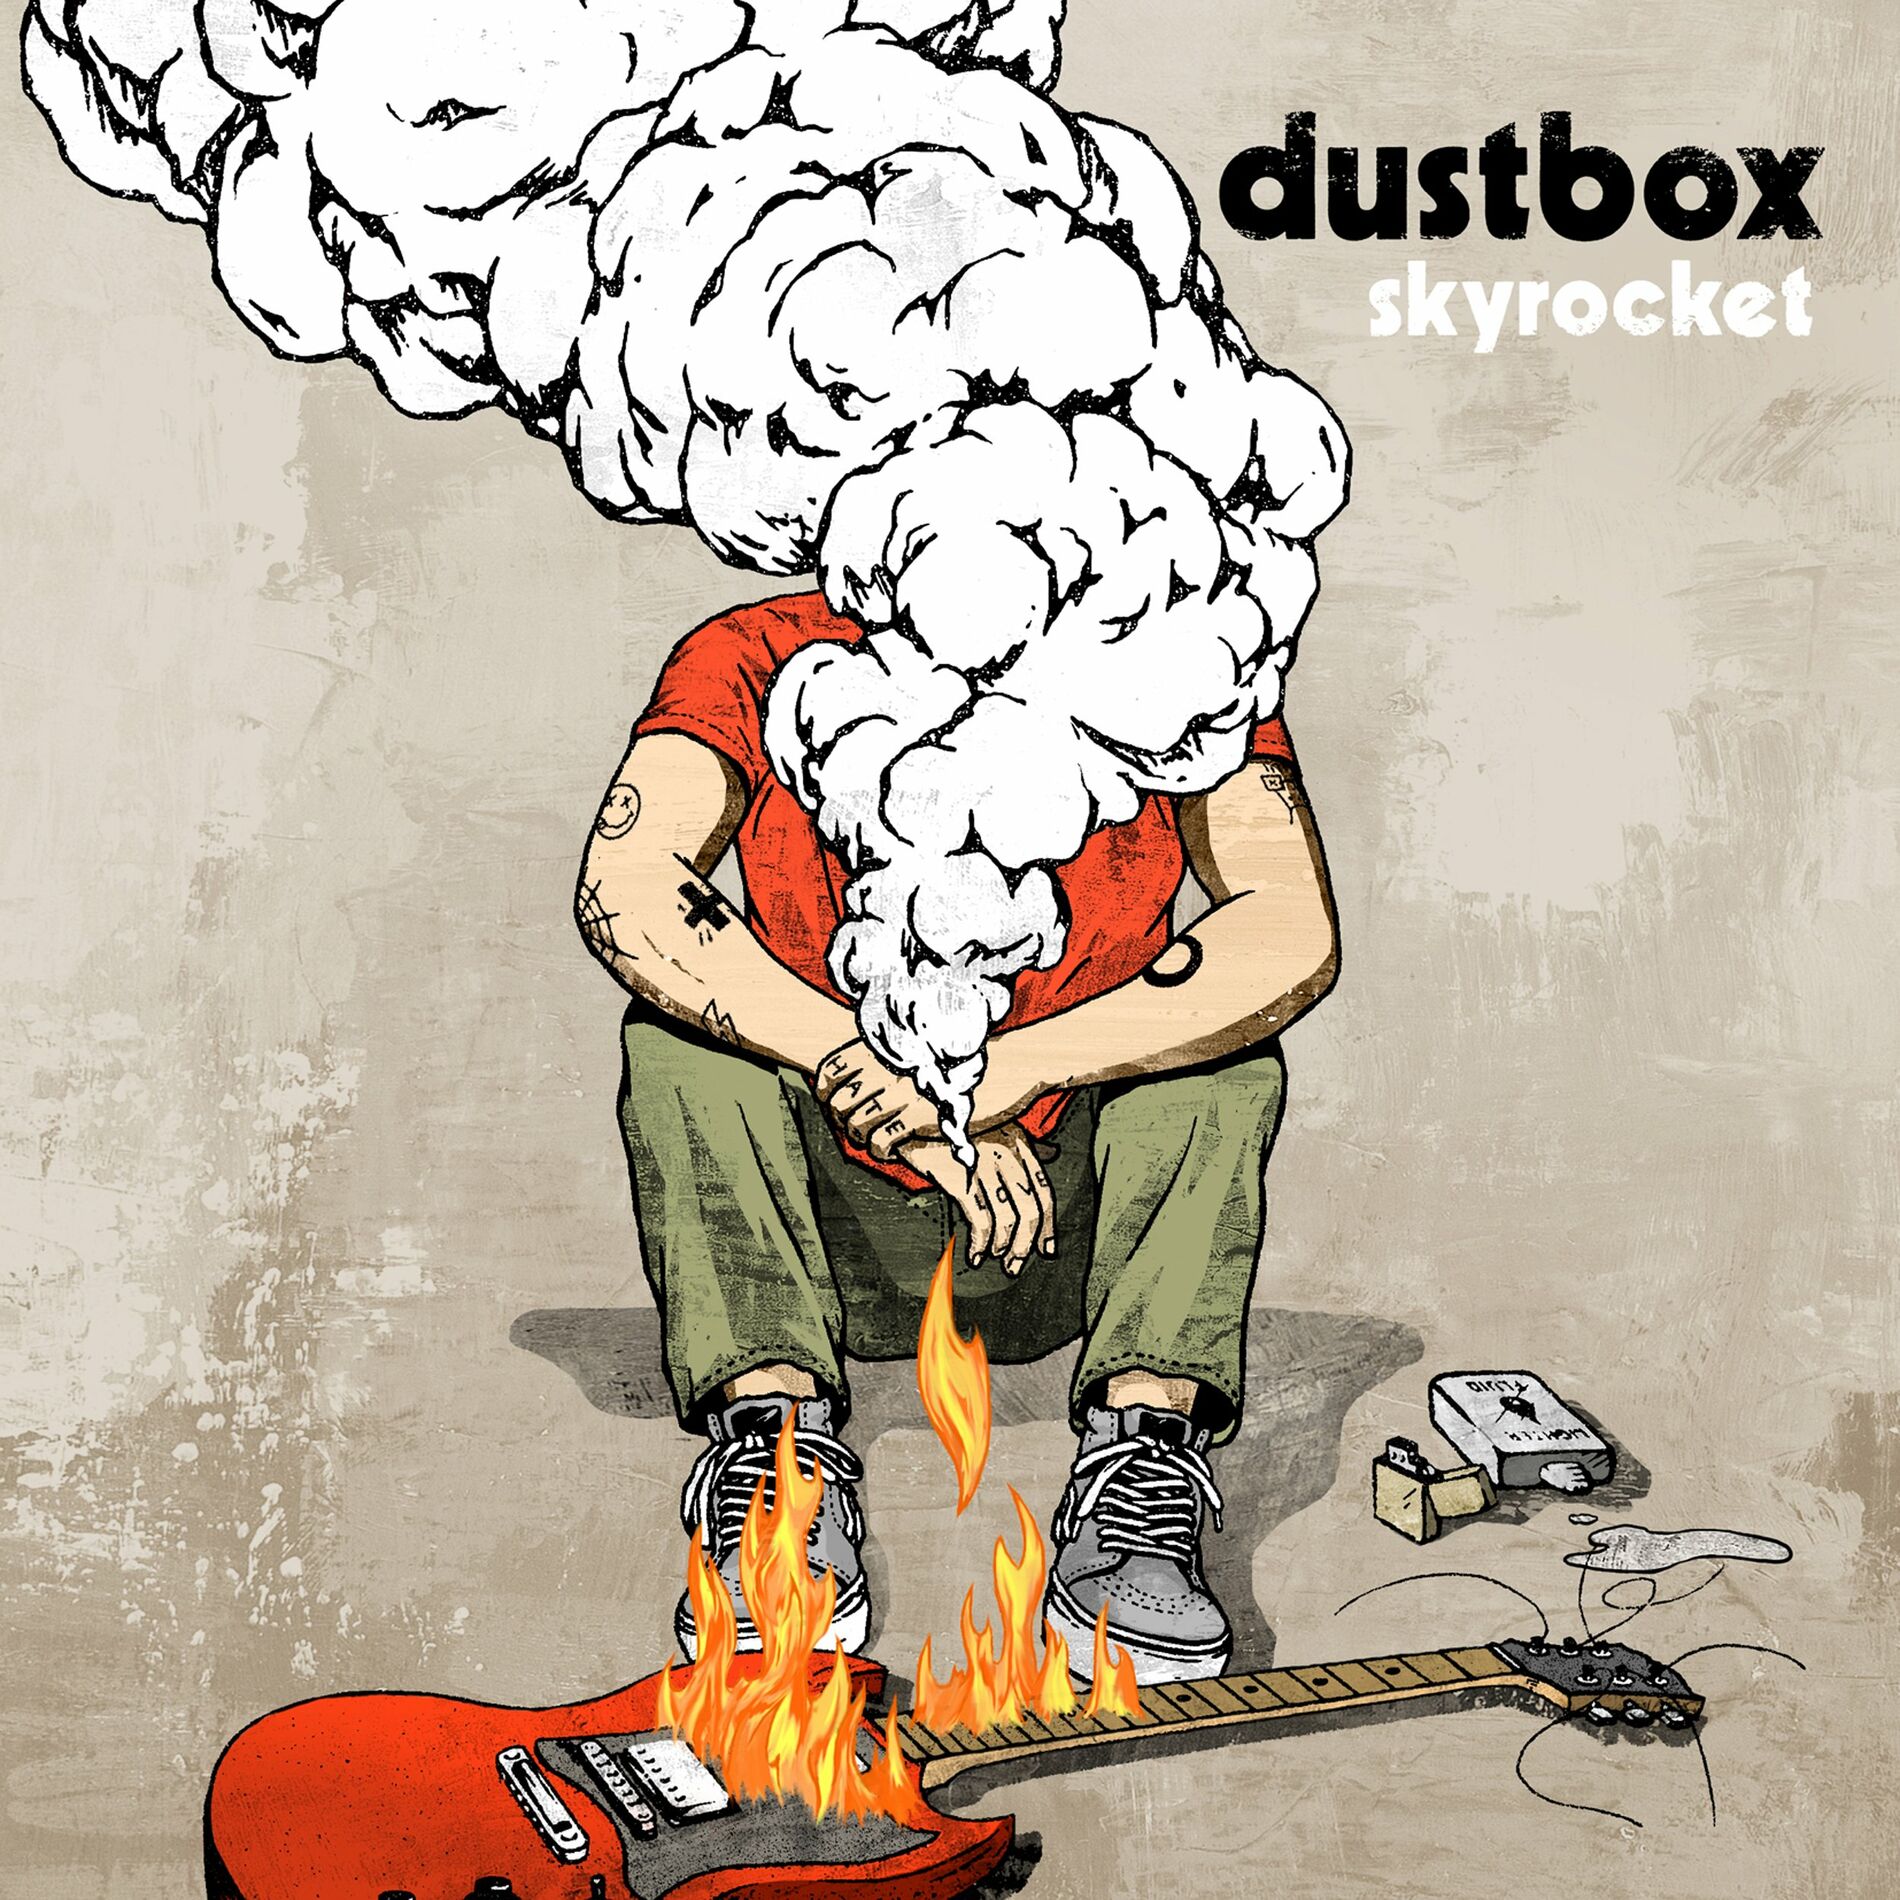 Dustbox: albums, songs, playlists | Listen on Deezer